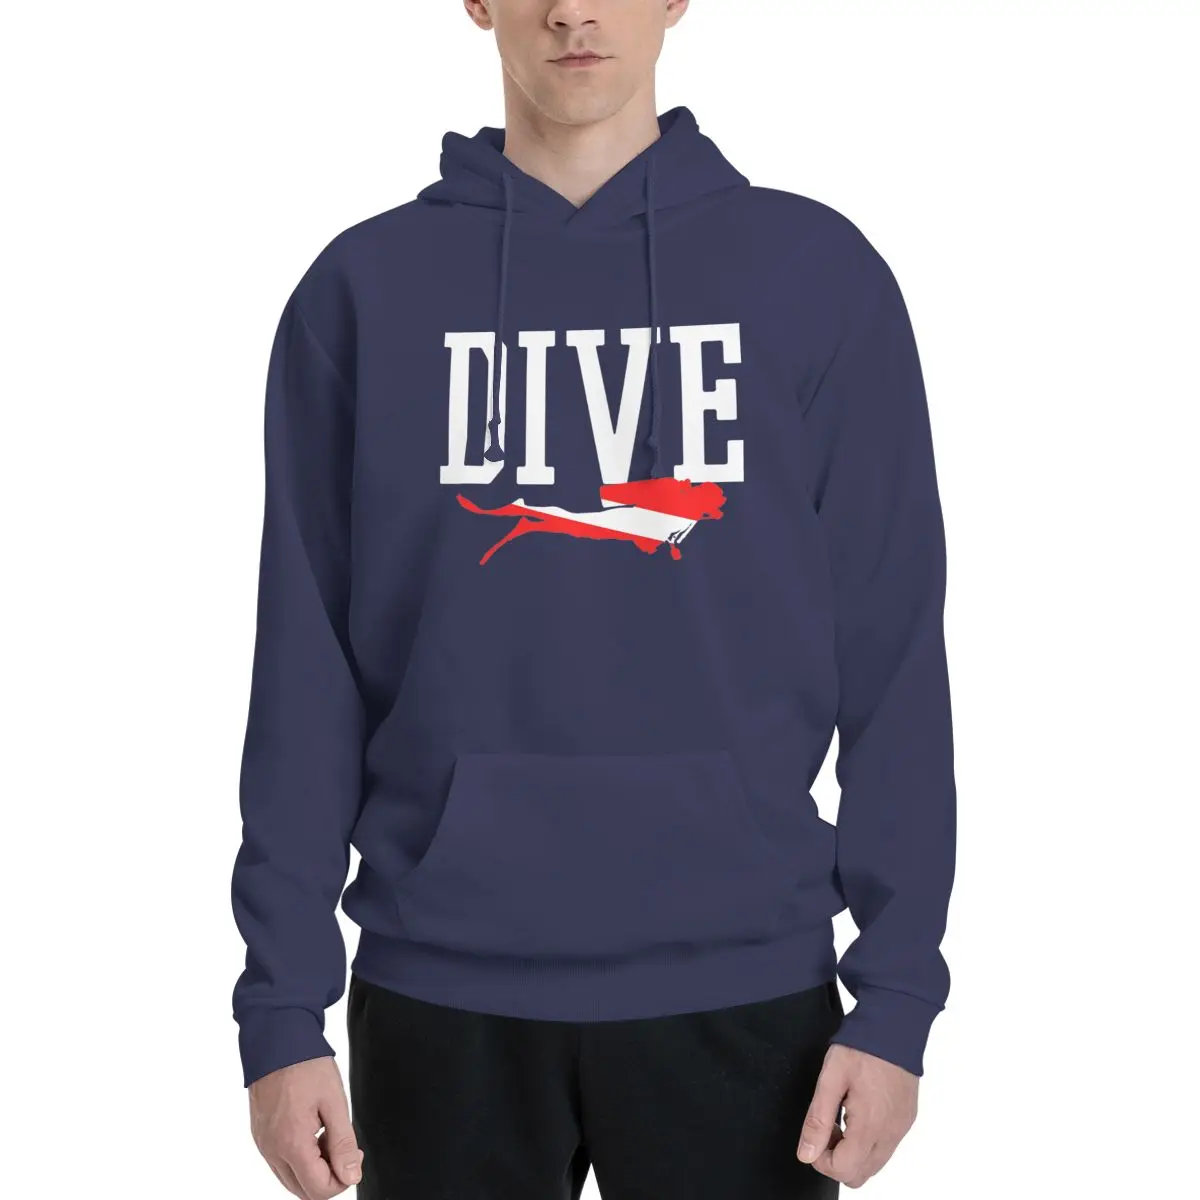 

Divin Scuba Diving 4 Couples Plus Velvet Hooded Sweater Home sexy Hooded rope Hoodie Graphic Vintage